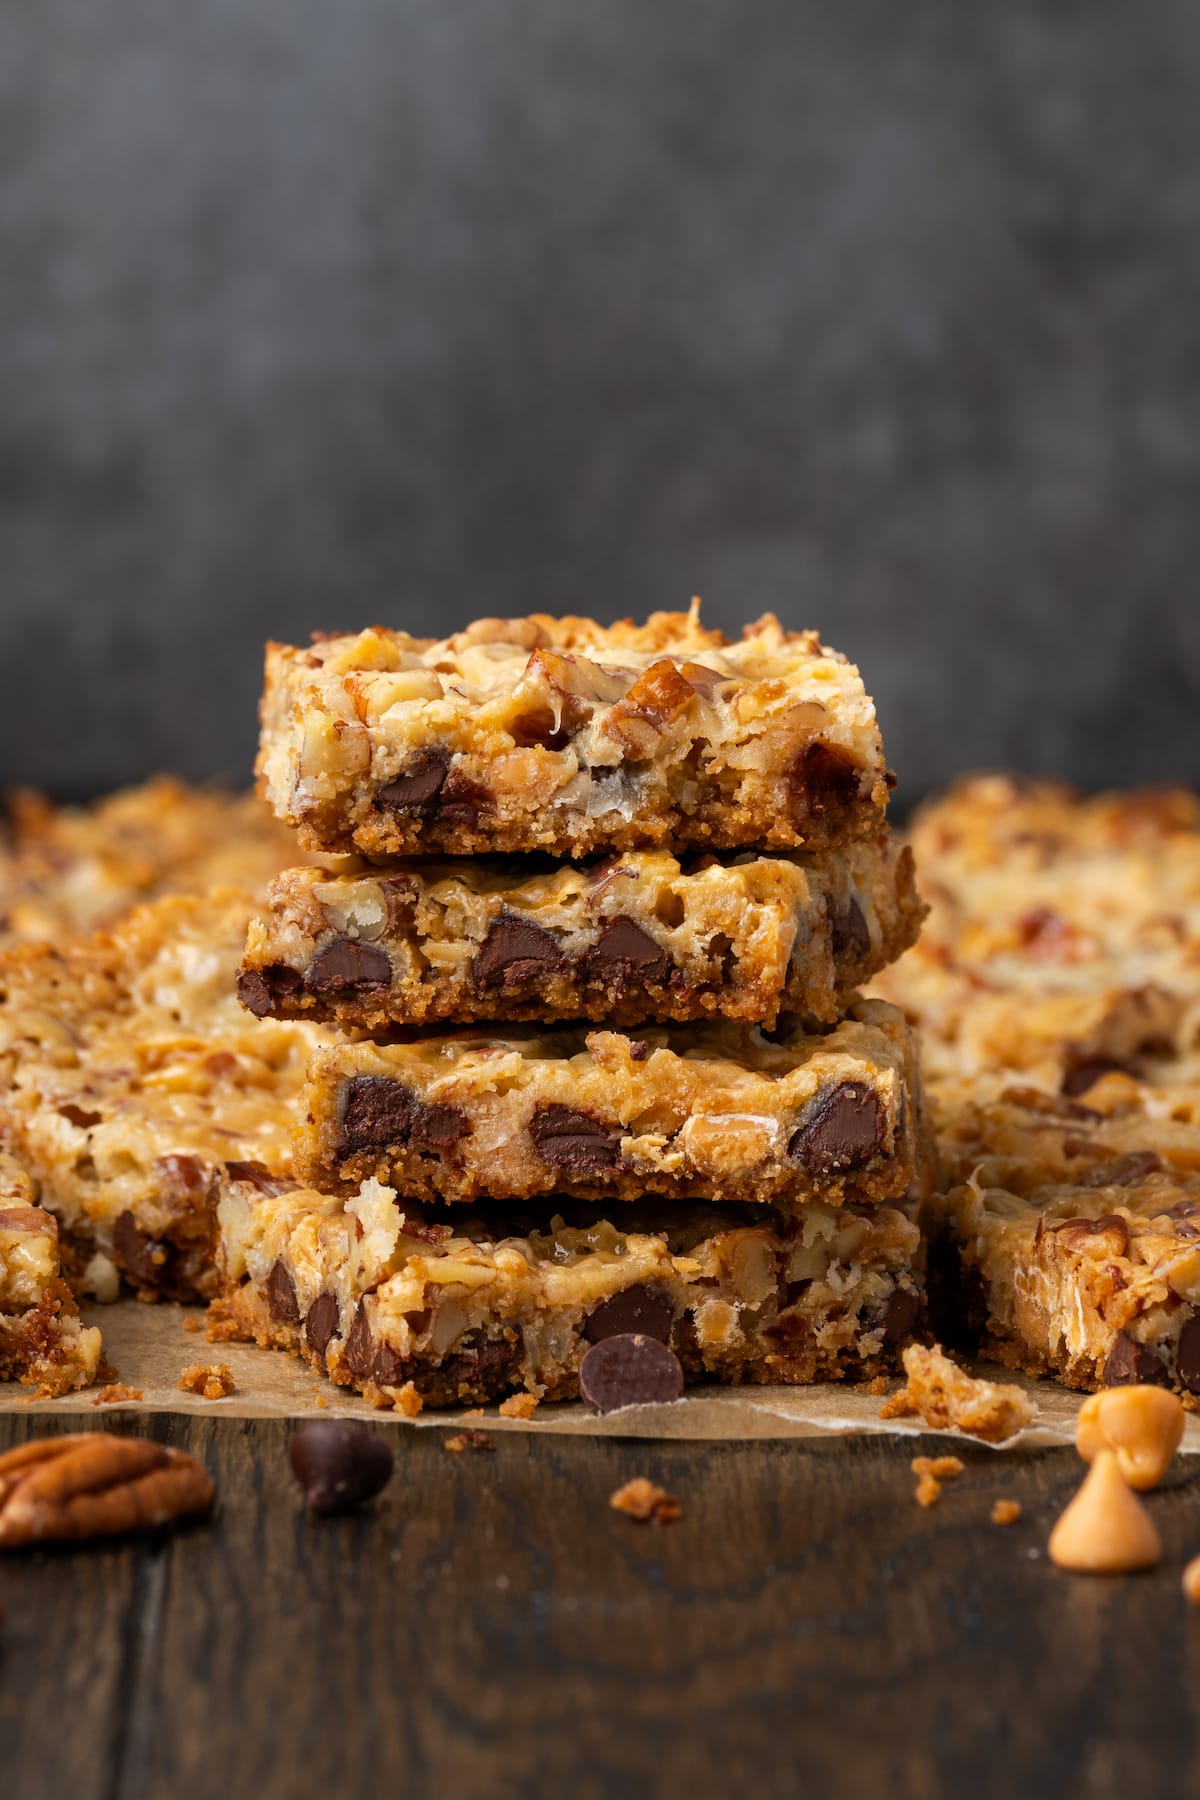 Side view of a stack of magic bars on a wooden countertop, with more bars in the background.